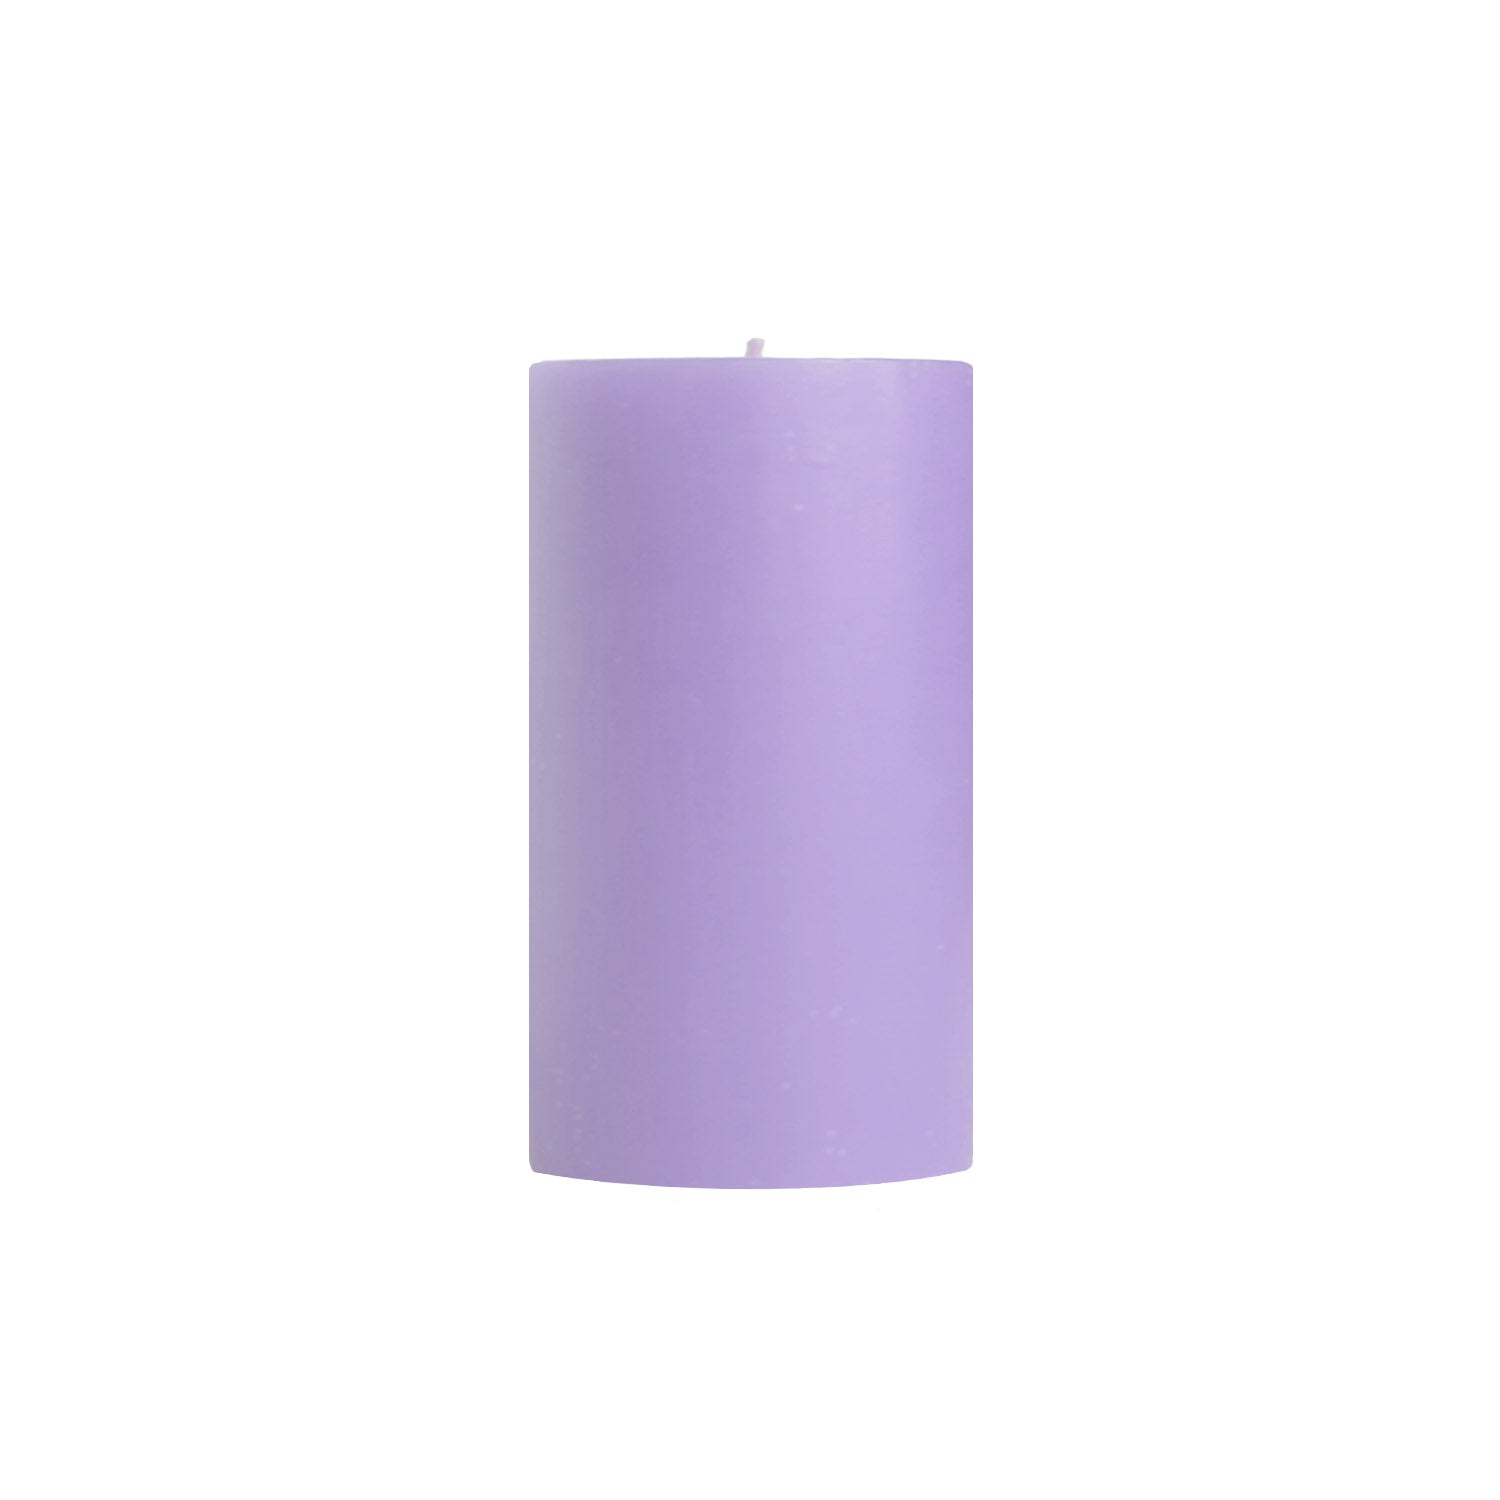 3x6" Lavender Scented Pillar Candle